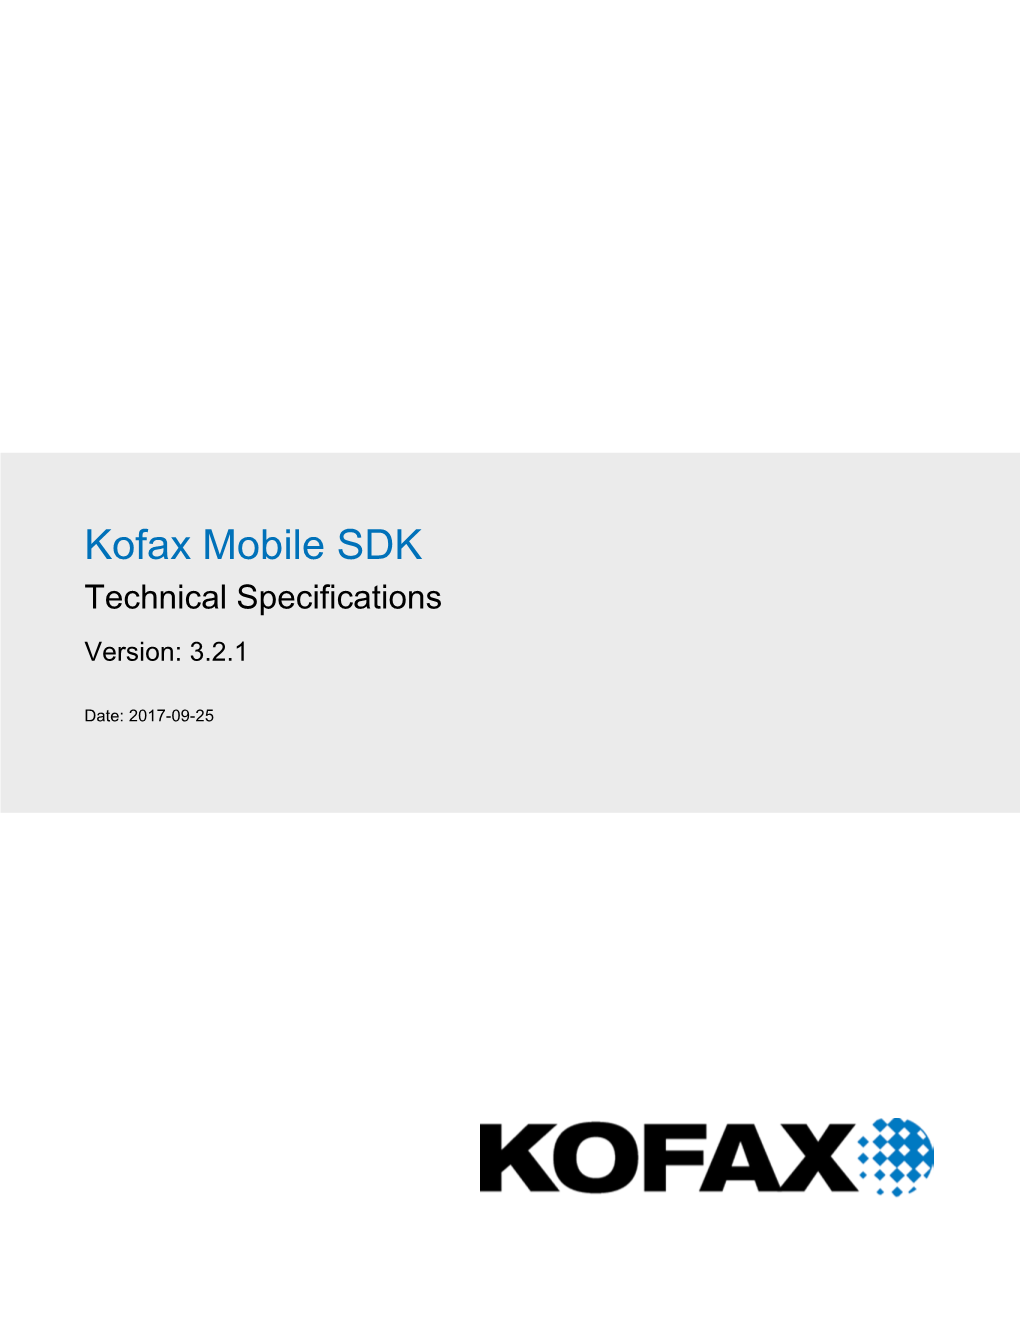 Kofax Mobile SDK 3.2.1 Technical Specifications